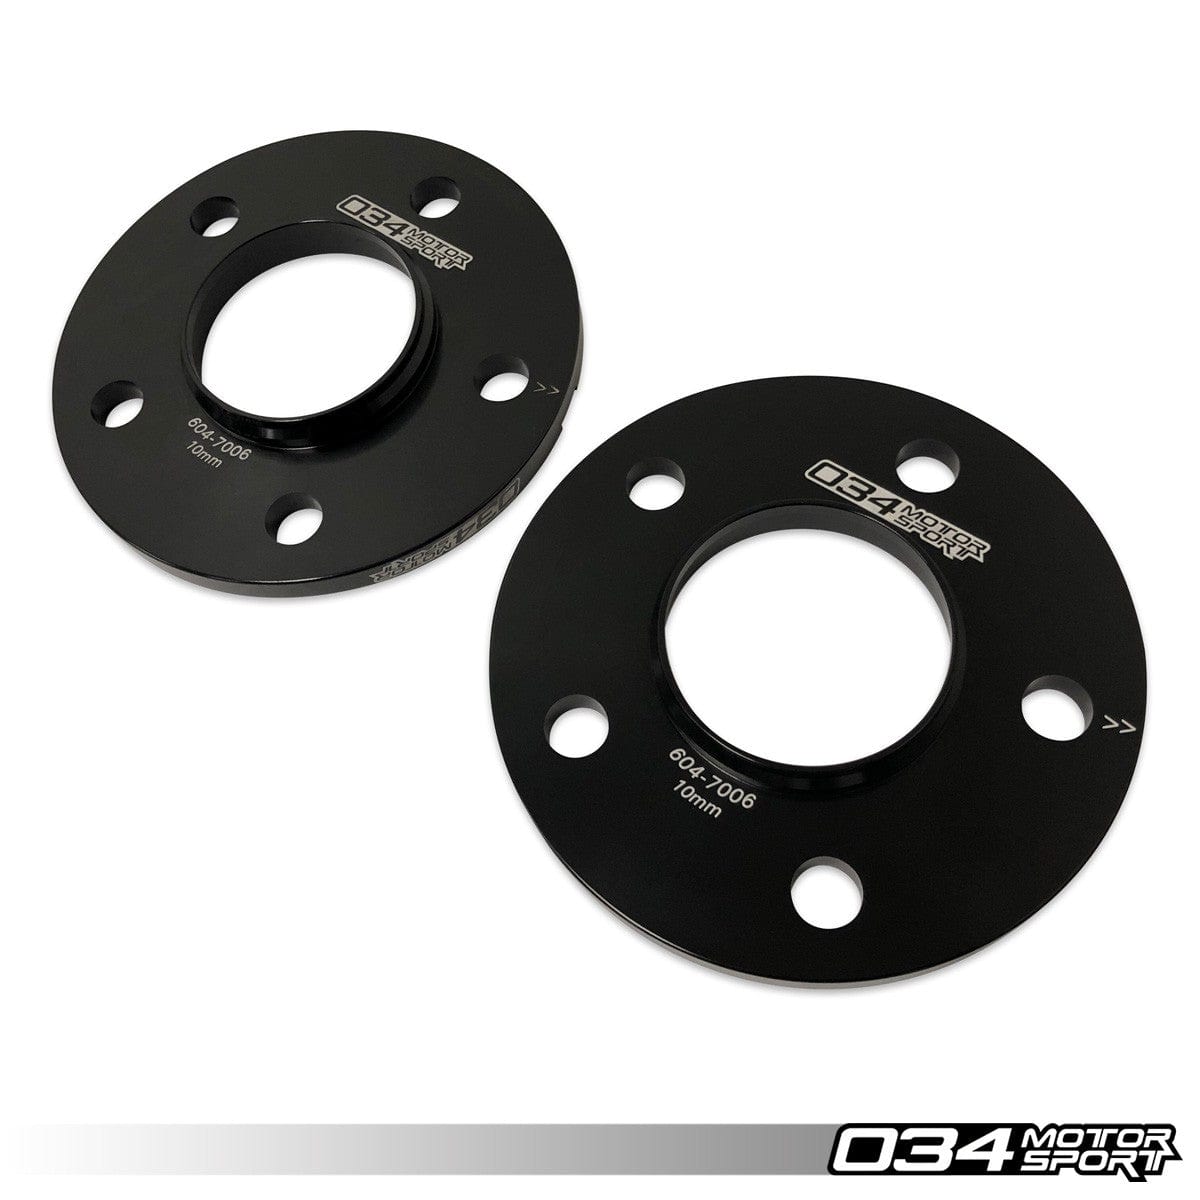 034Motorsport Wheel Spacer Pair, 10mm, Audi 5x112mm with 66.5mm Center Bore - ML Performance